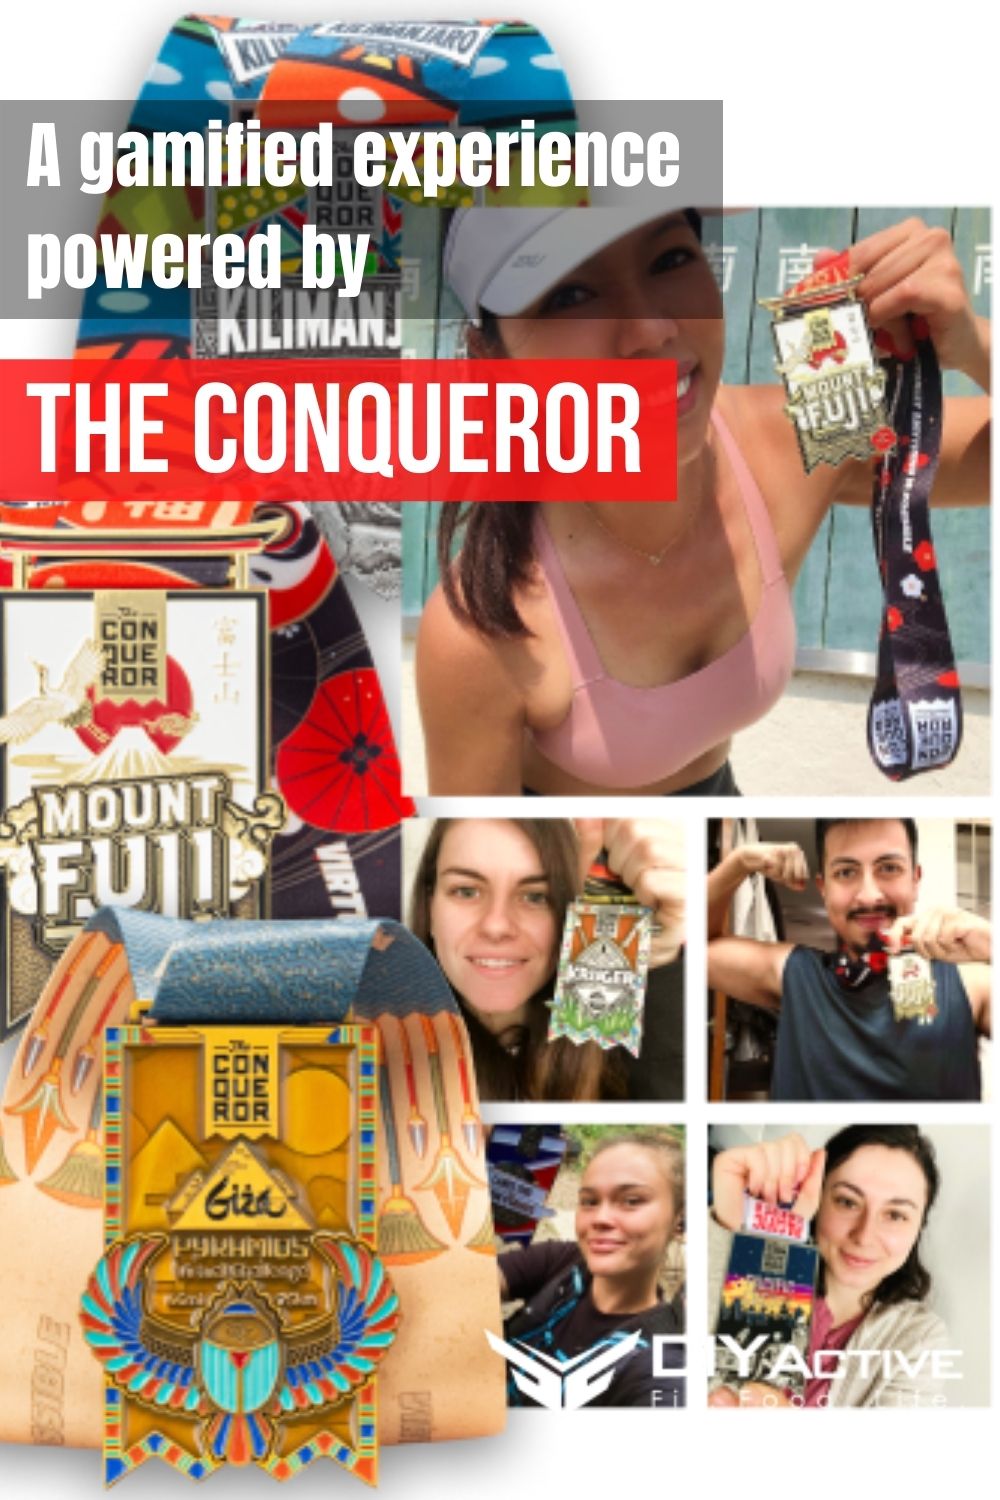 Exercise While Having Fun - A gamified experience powered by The Conqueror